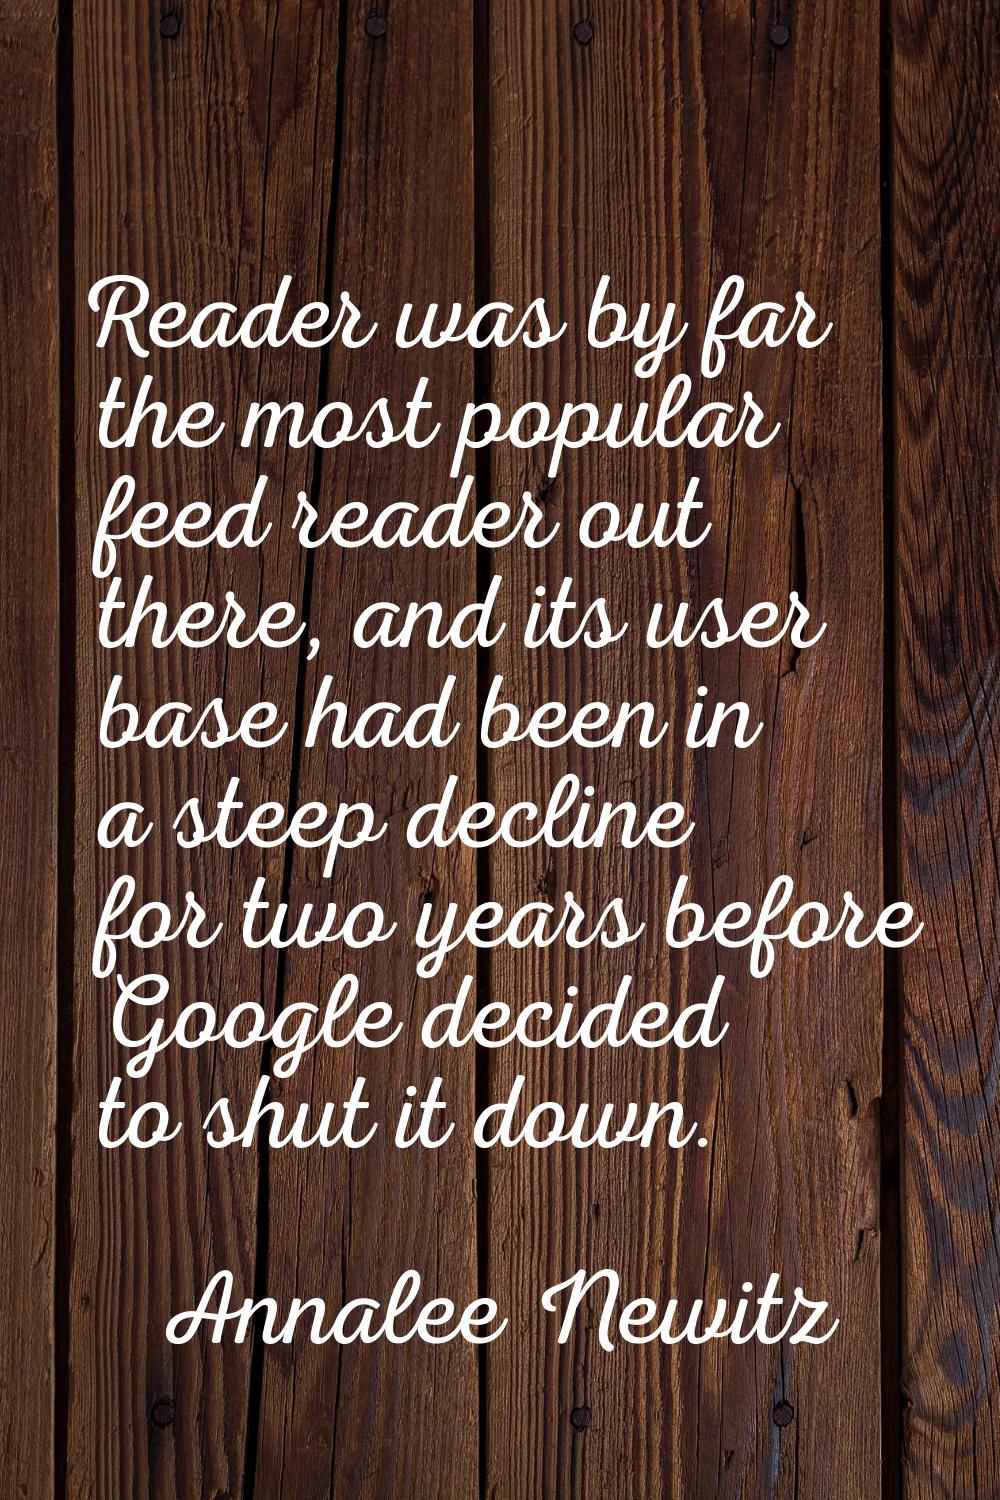 Reader was by far the most popular feed reader out there, and its user base had been in a steep dec